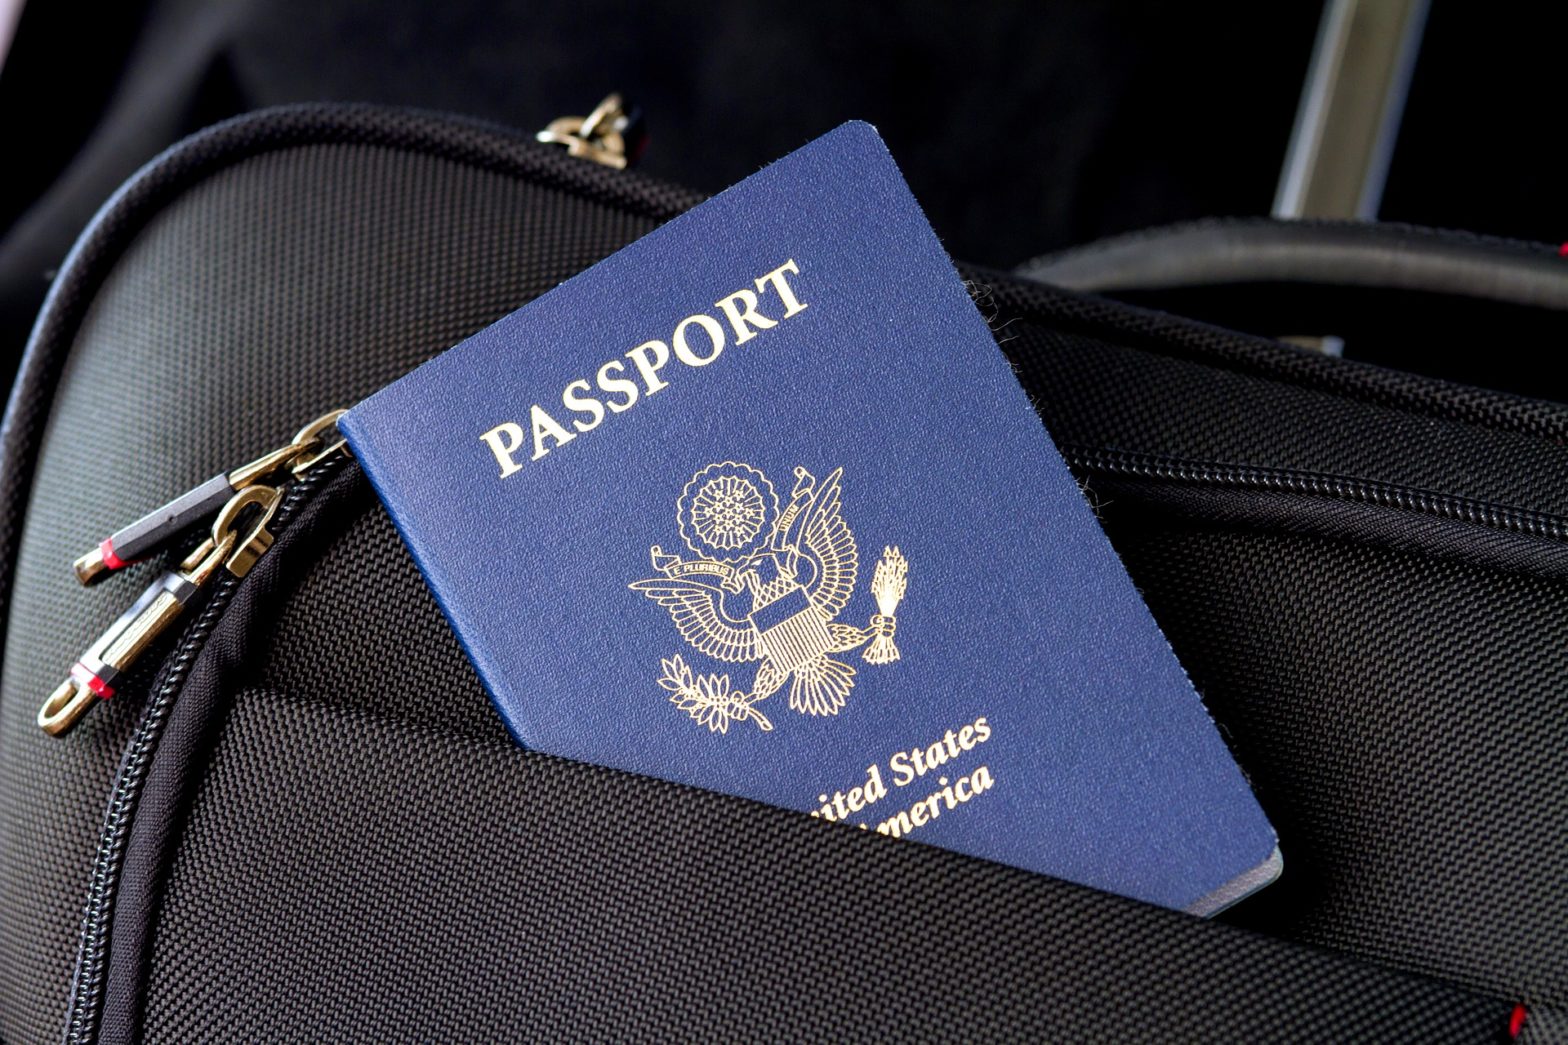 The Crucial Reason to Avoid Storing Your Passport in Your Carry-on Luggage